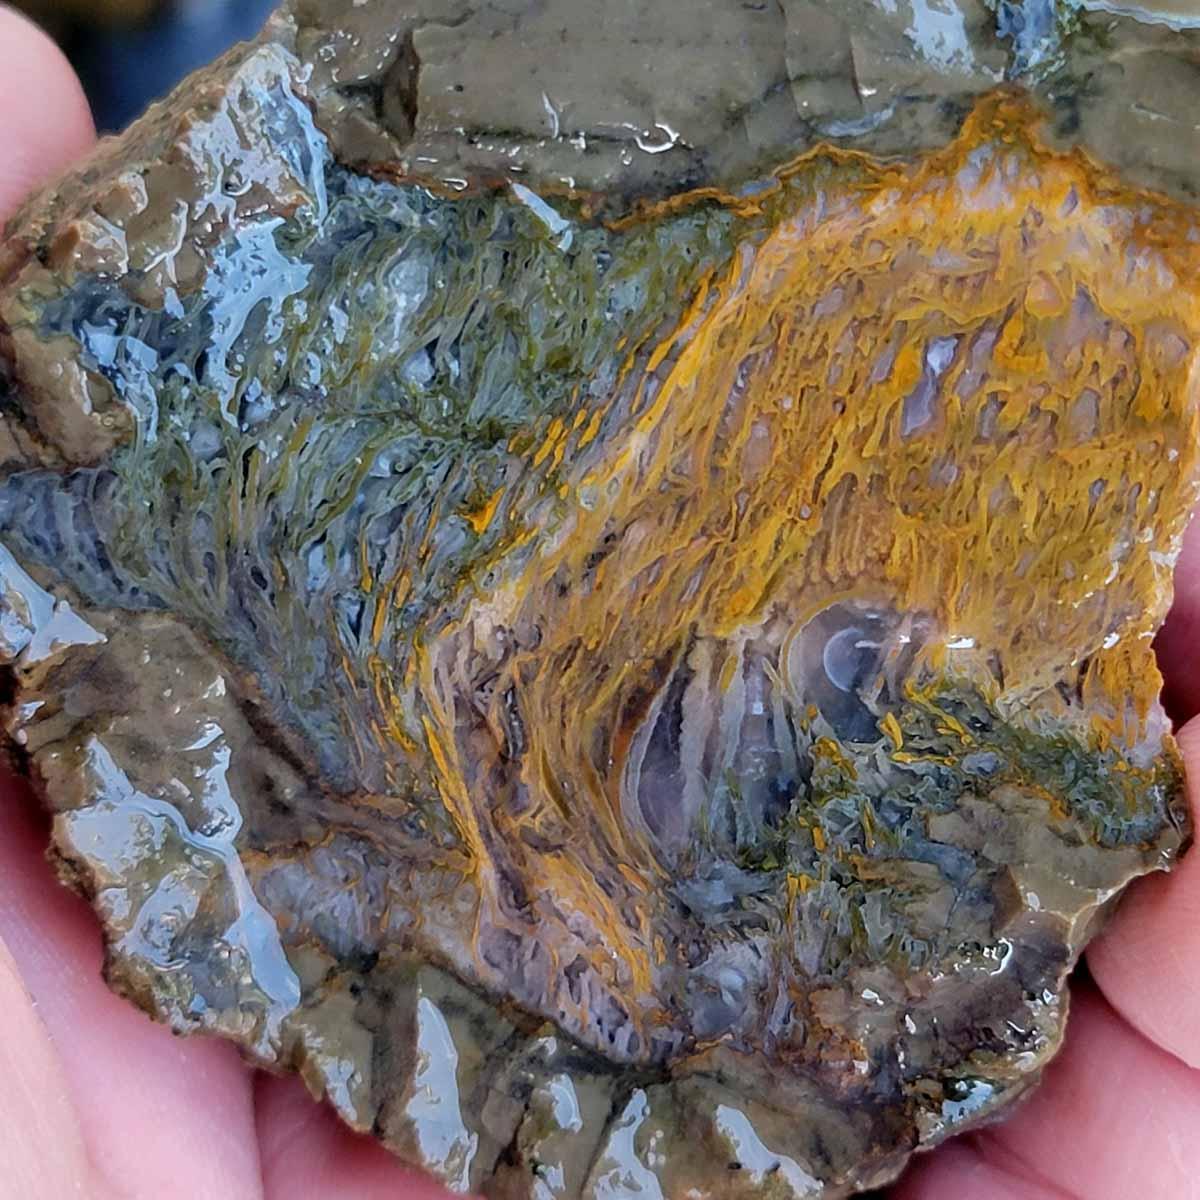 Priday Richardson Moss Bed Thunderegg Cutting Rough Flatrate! - LapidaryCentral